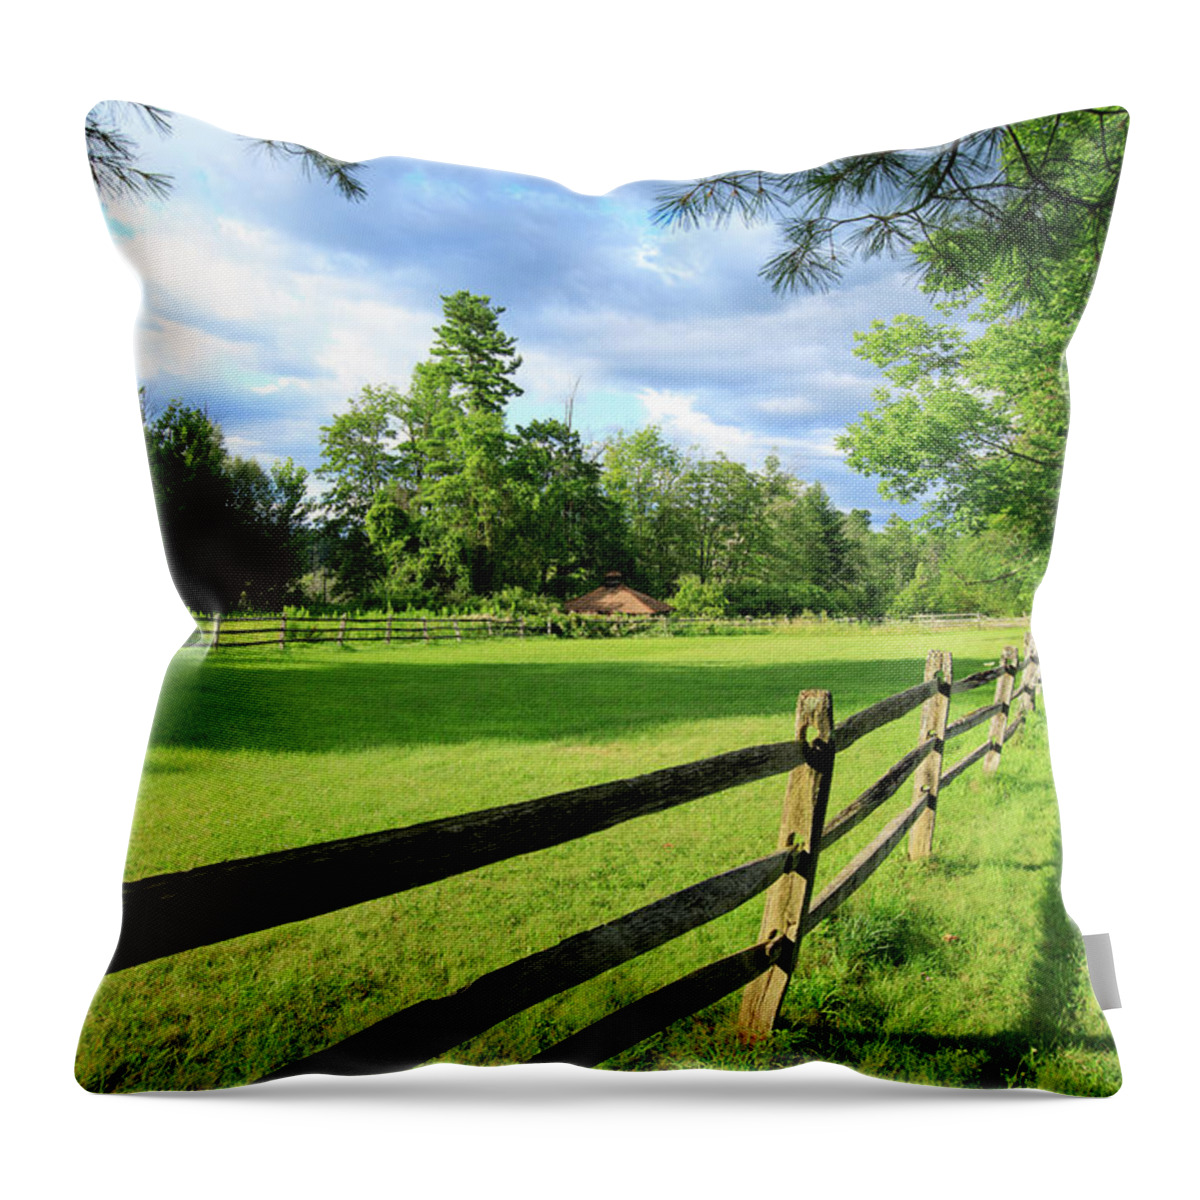 New England Throw Pillow featuring the photograph New England Field #1620 by Michael Fryd